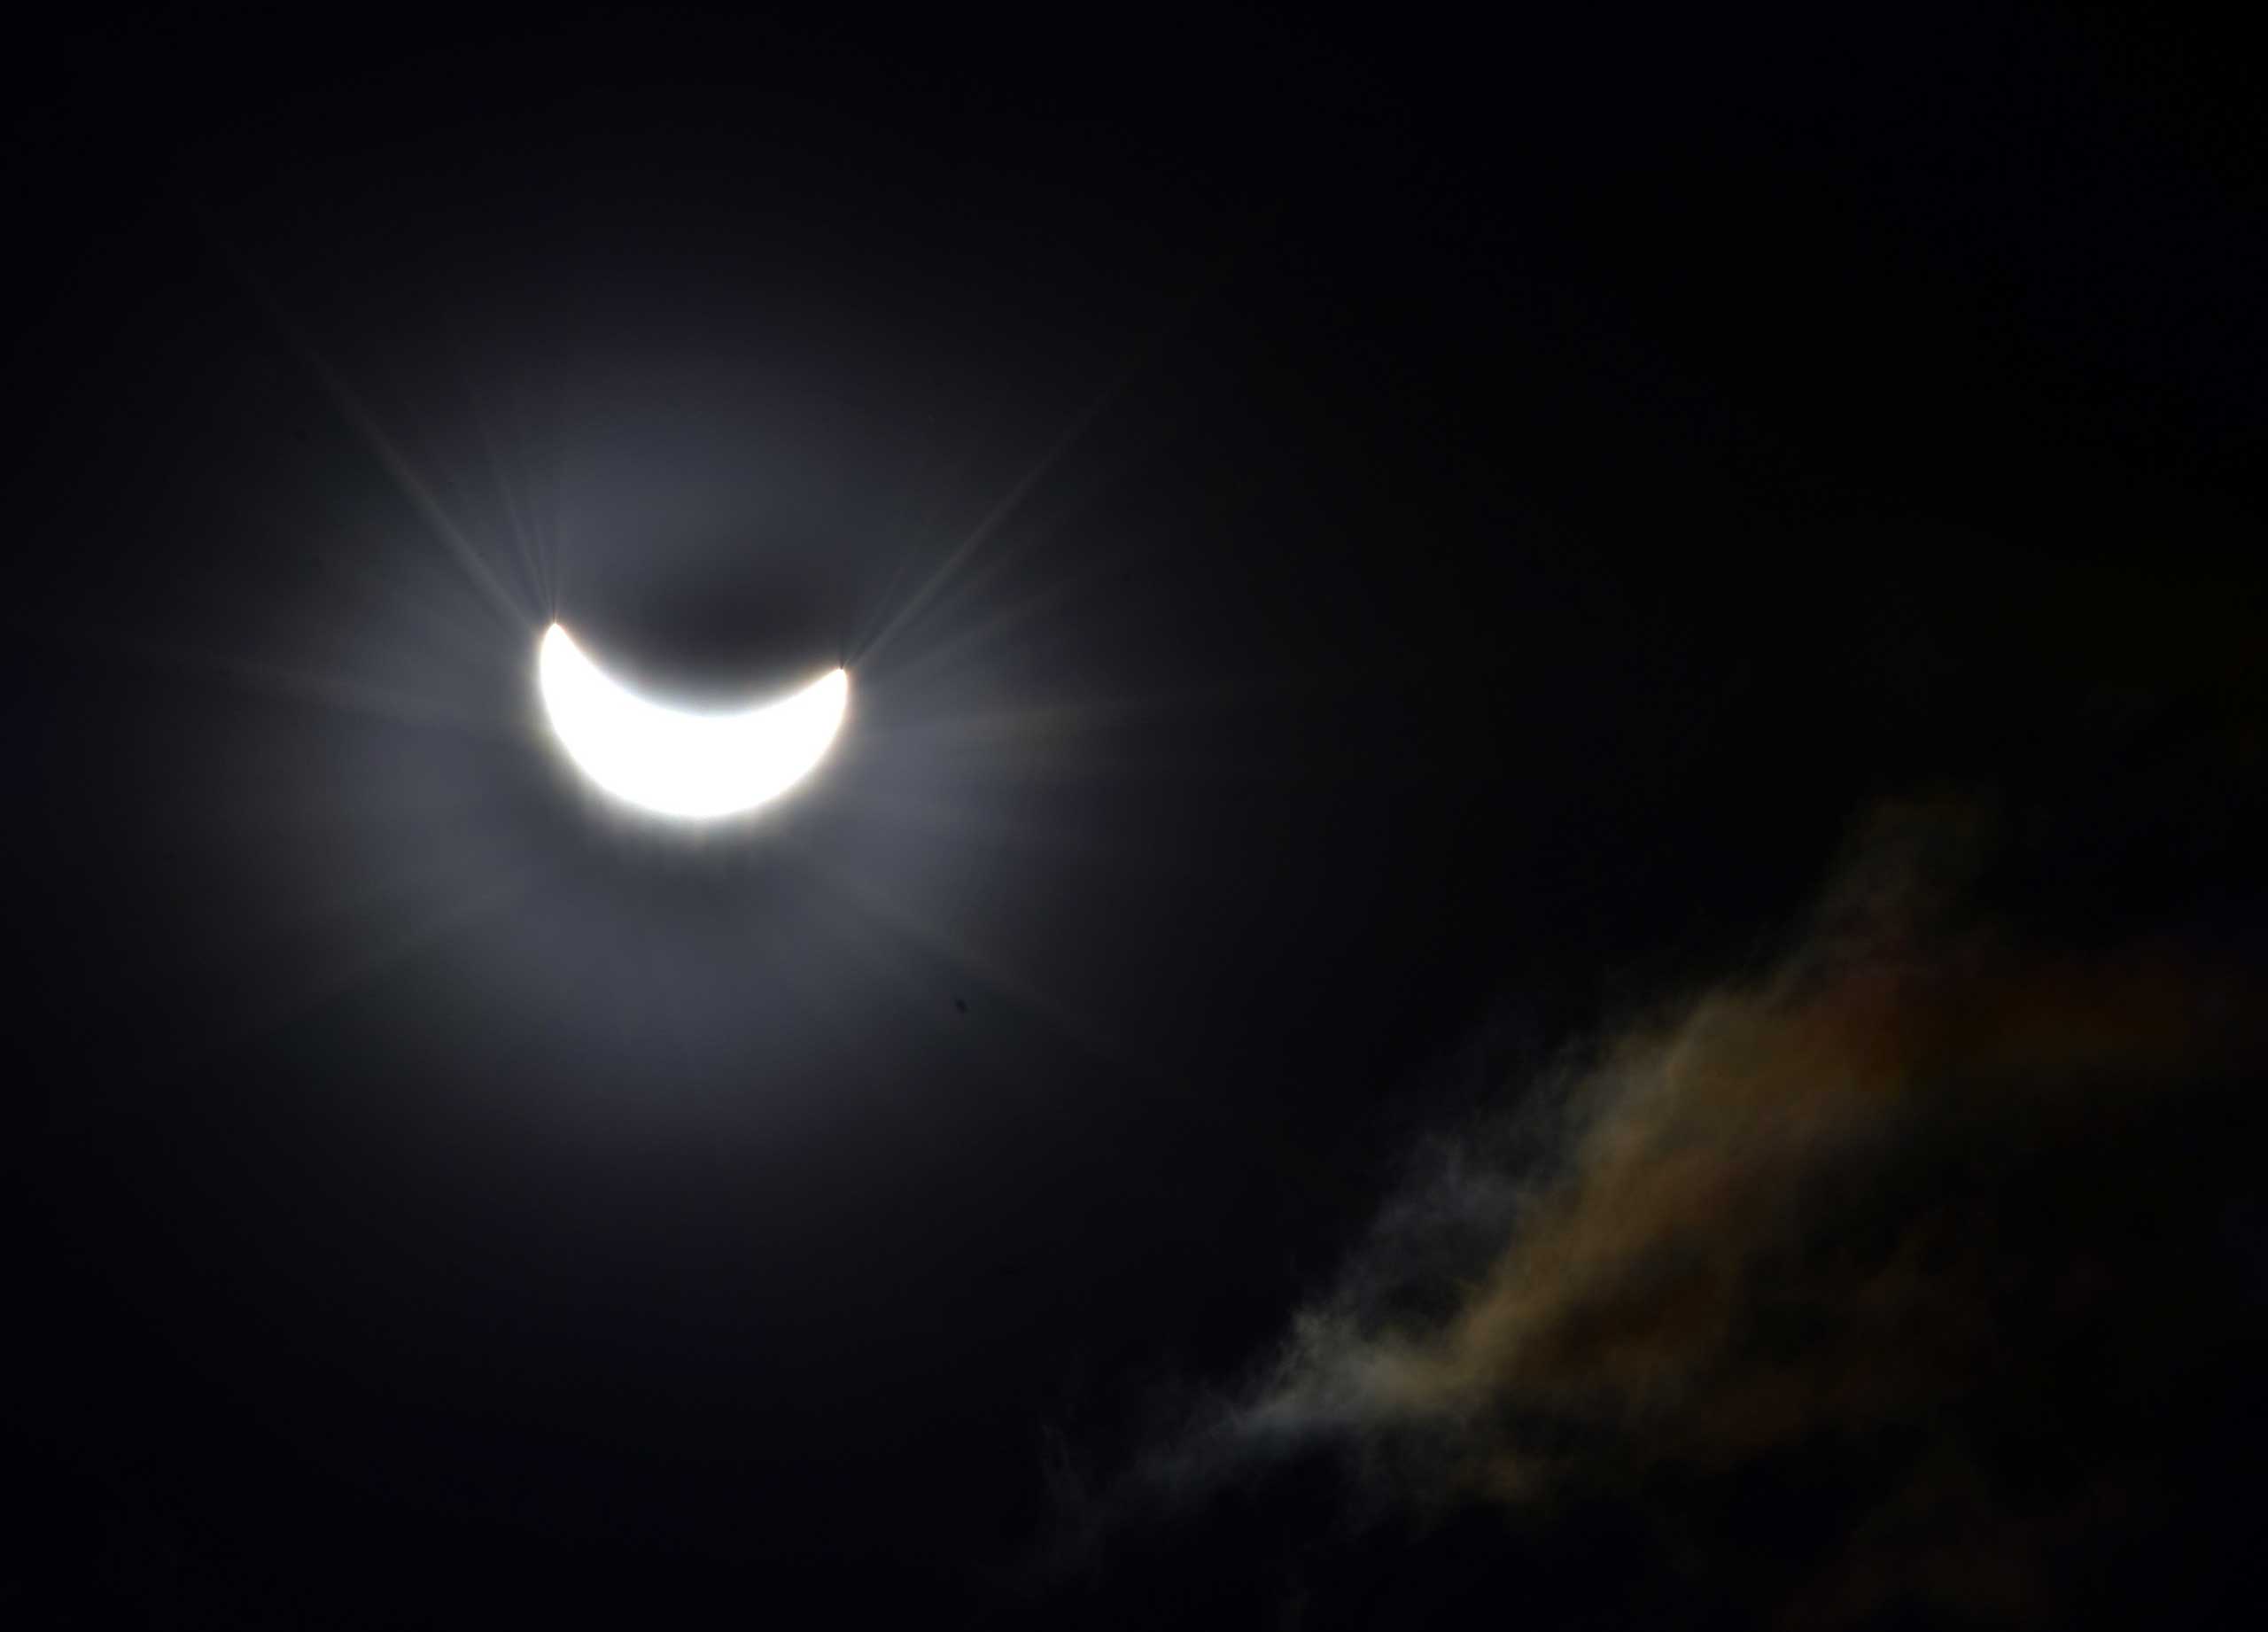 Partial Solar eclipse seen from Yorkshire, United Kingdom on March 20, 2015.